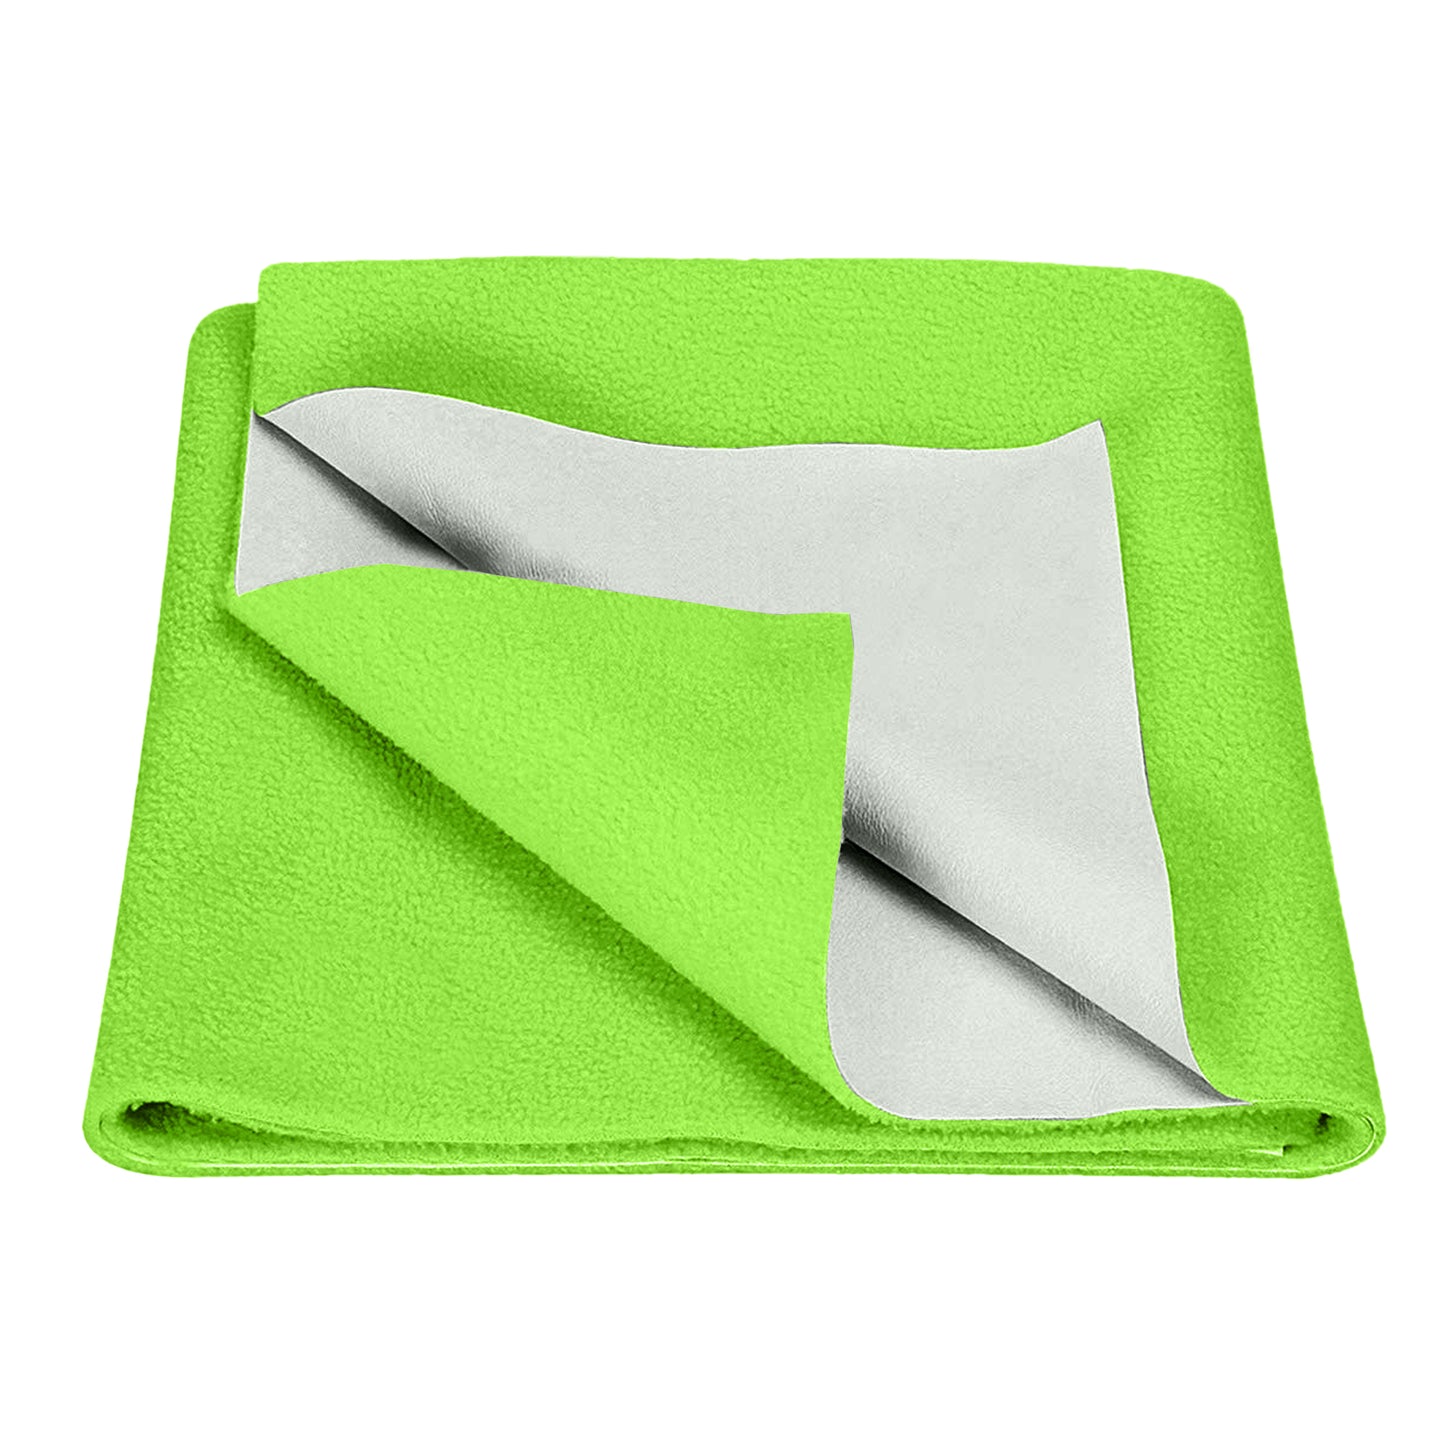 Waterproof Bed Protector,Quick Dry Sheet, Baby Bed Protector (70 X 100 CM), Pack of 1 -PISTA GREEN